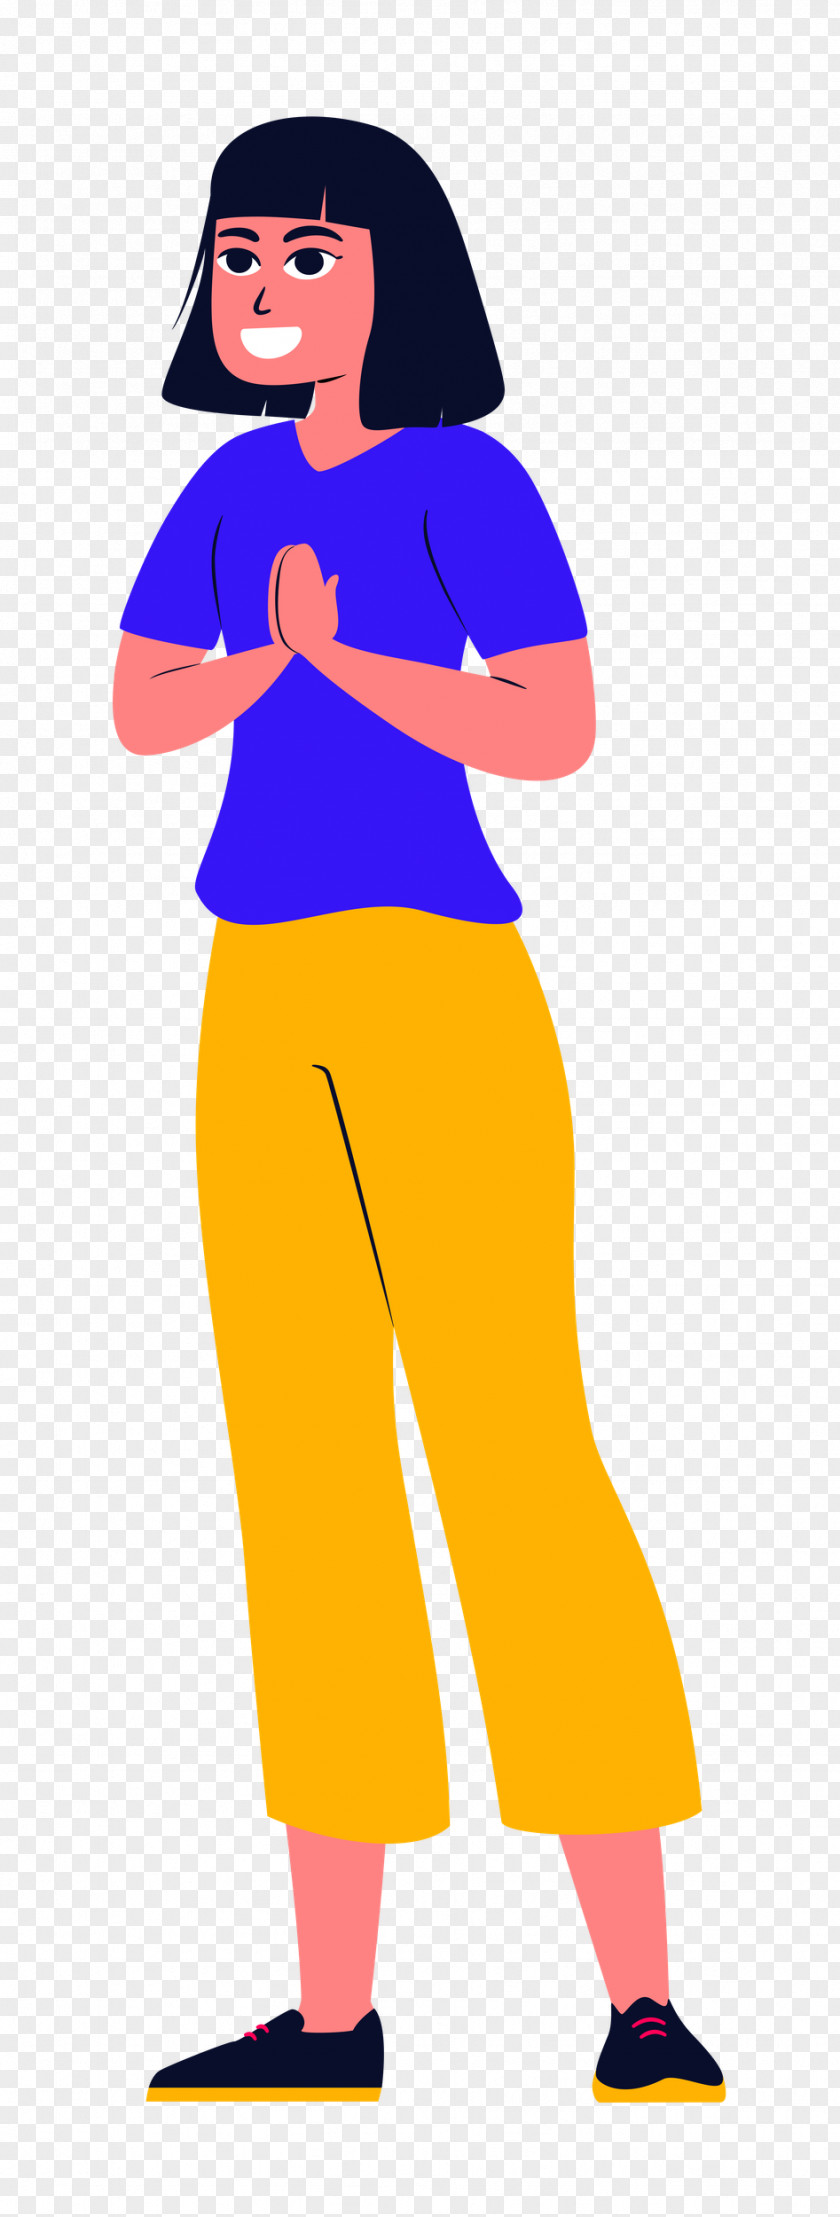 Mask Wilma Flintstone Fred Character Clothing PNG